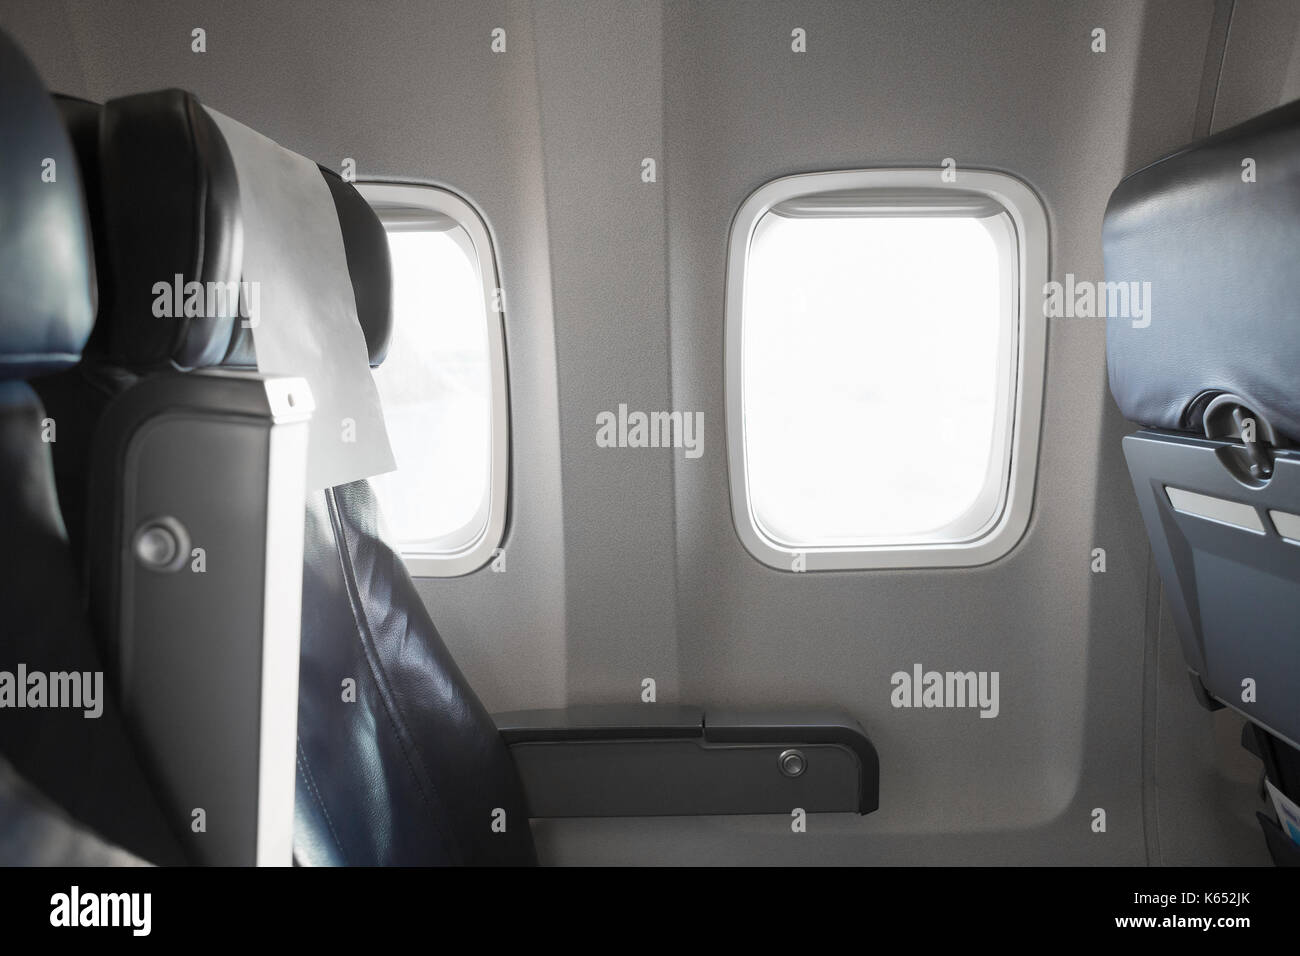 Airplane interior cabine and windows with empty passengers' seats Stock Photo